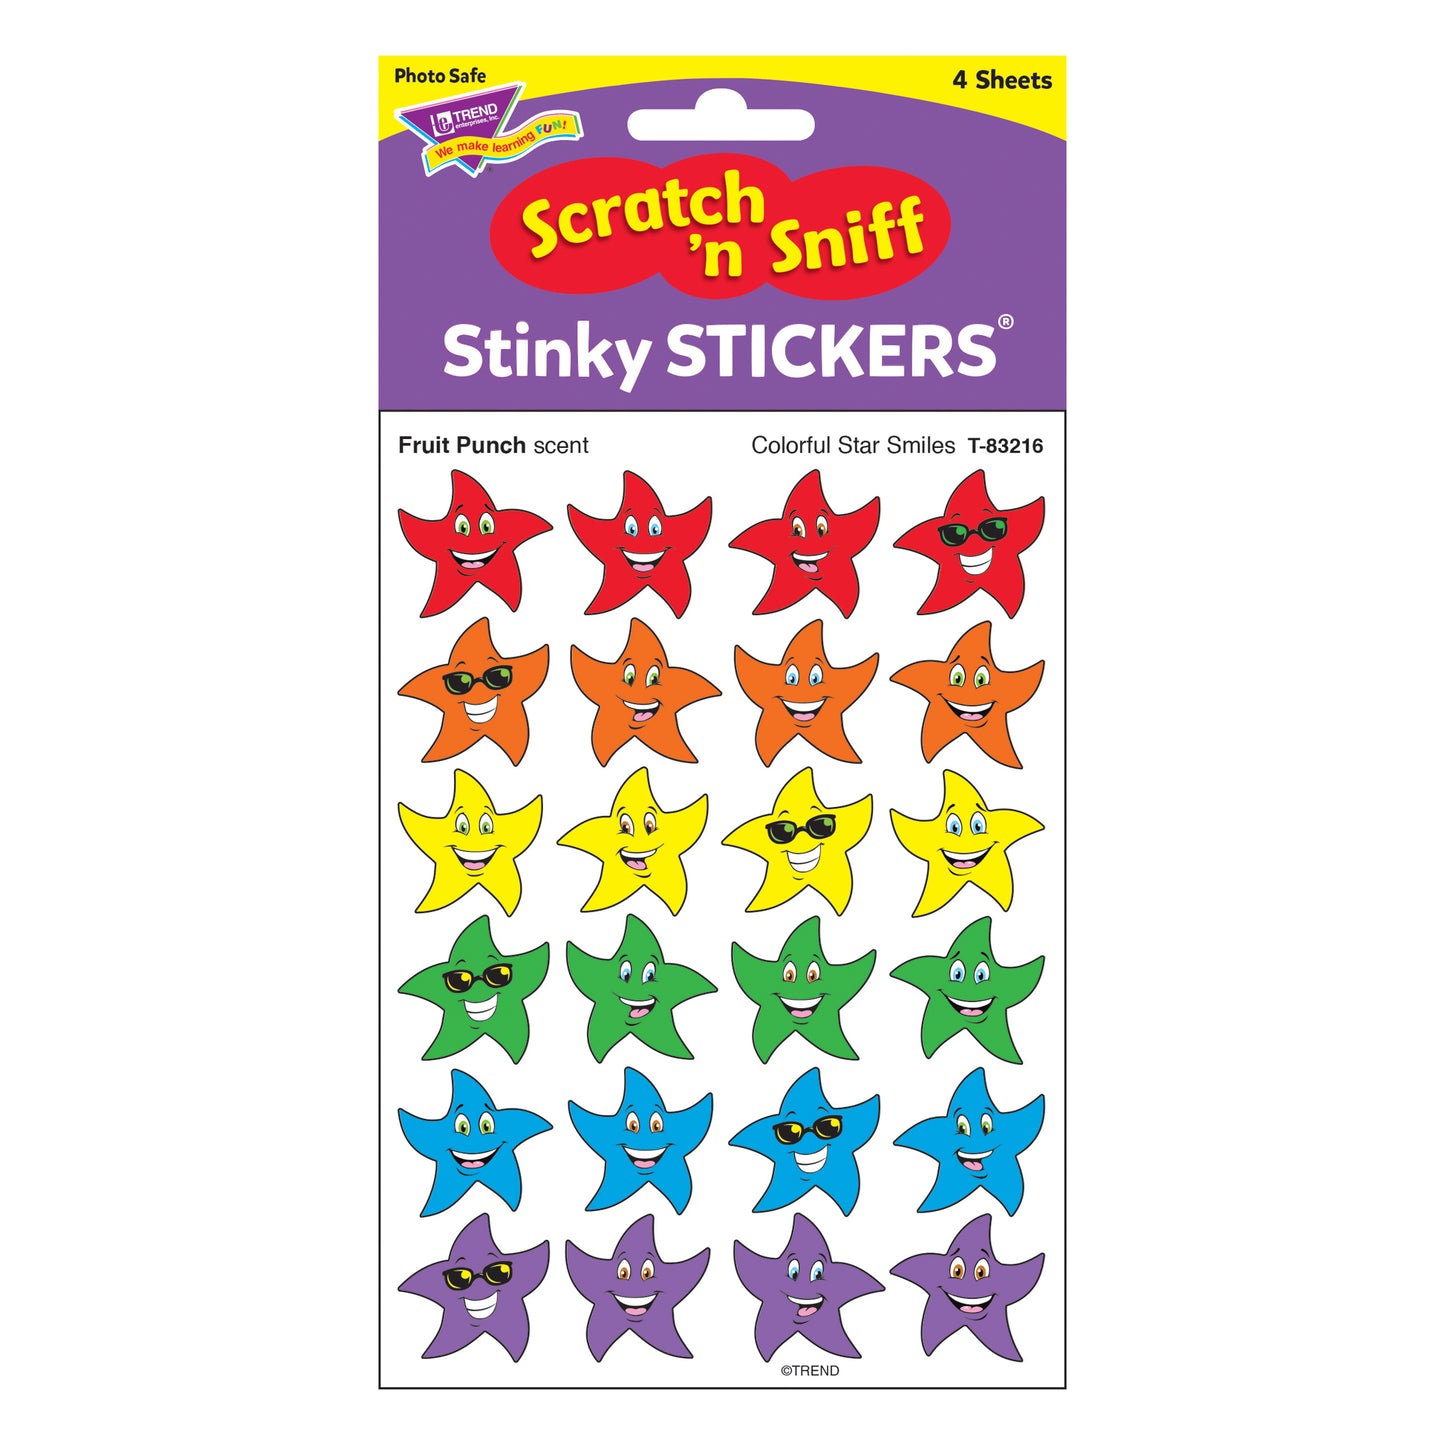 Colorful Star Smiles/Fruit Punch Stinky Stickers®, 96 Per Pack, 6 Packs